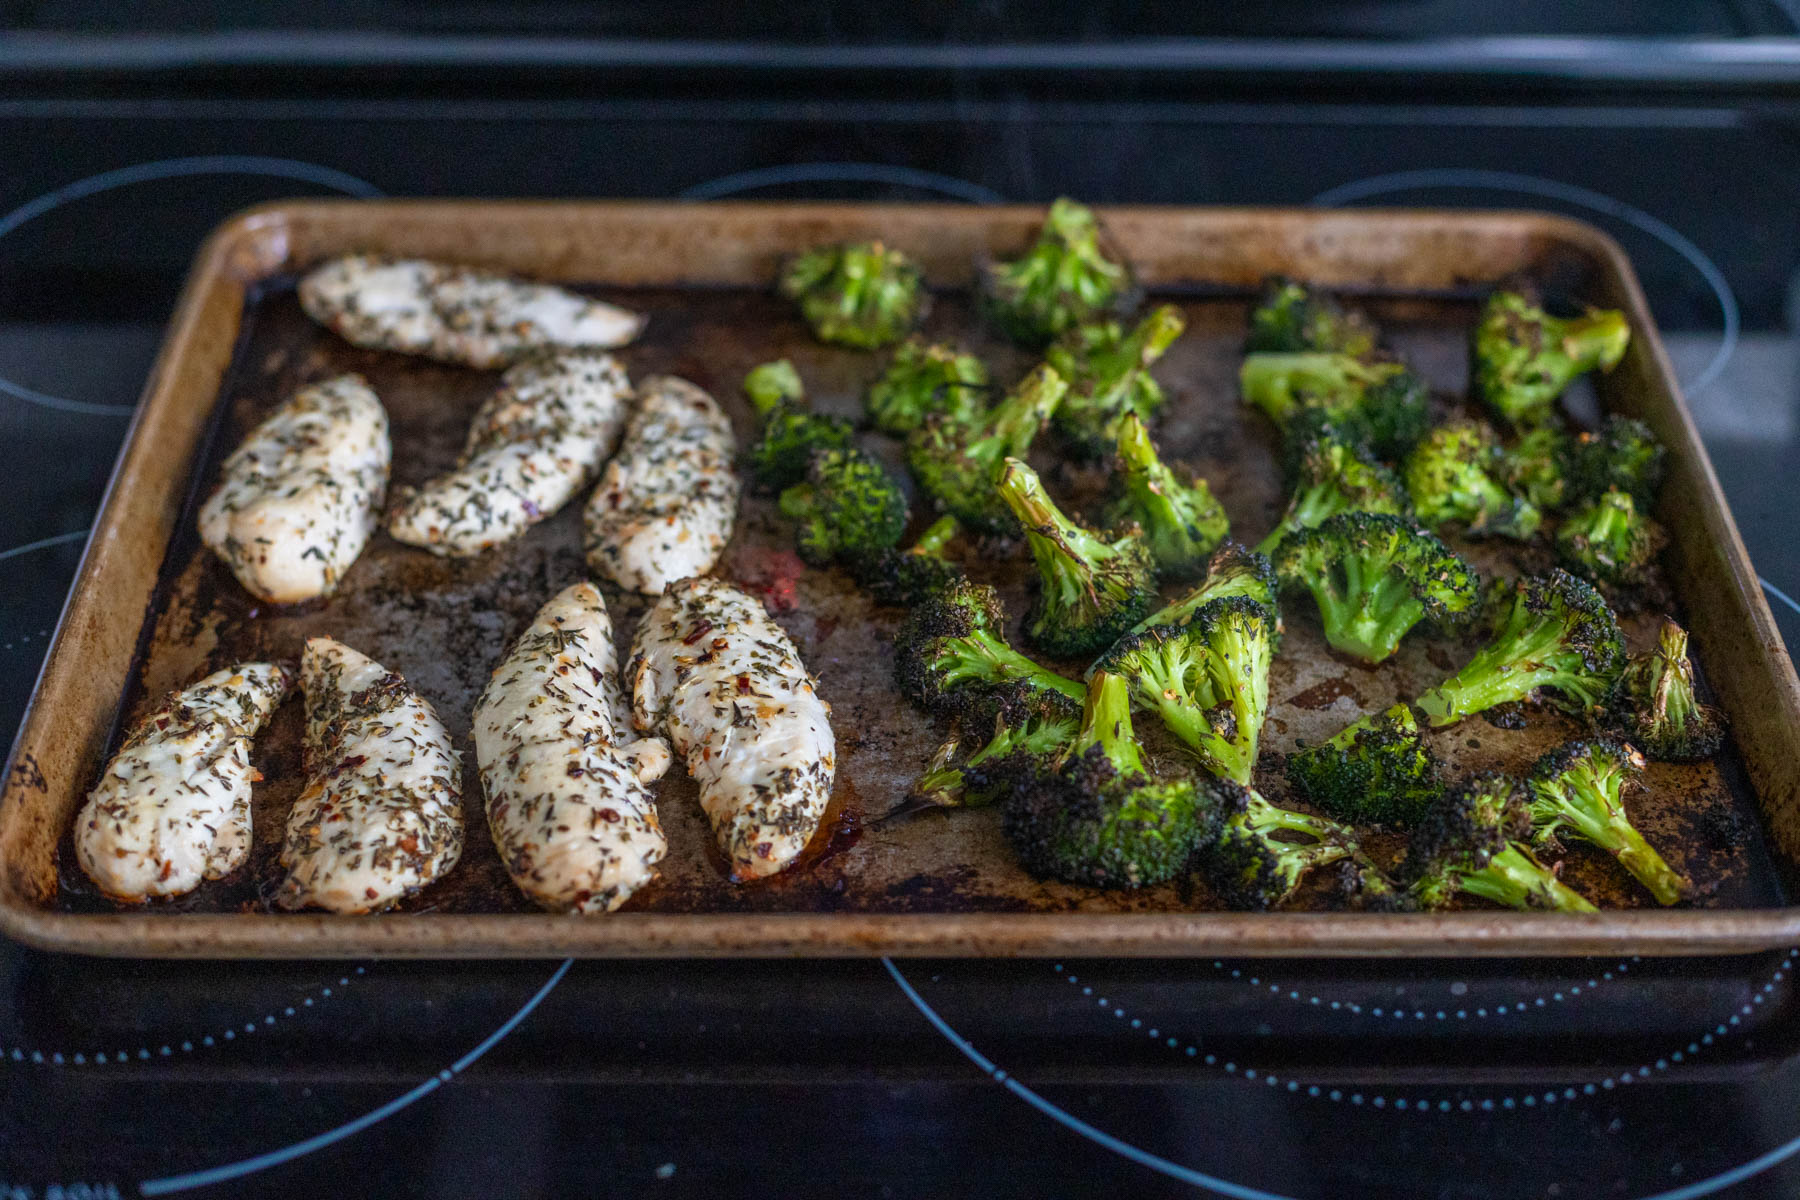 The sheet pan is fresh out of the oven, the chicken and broccoli are fully cooked.